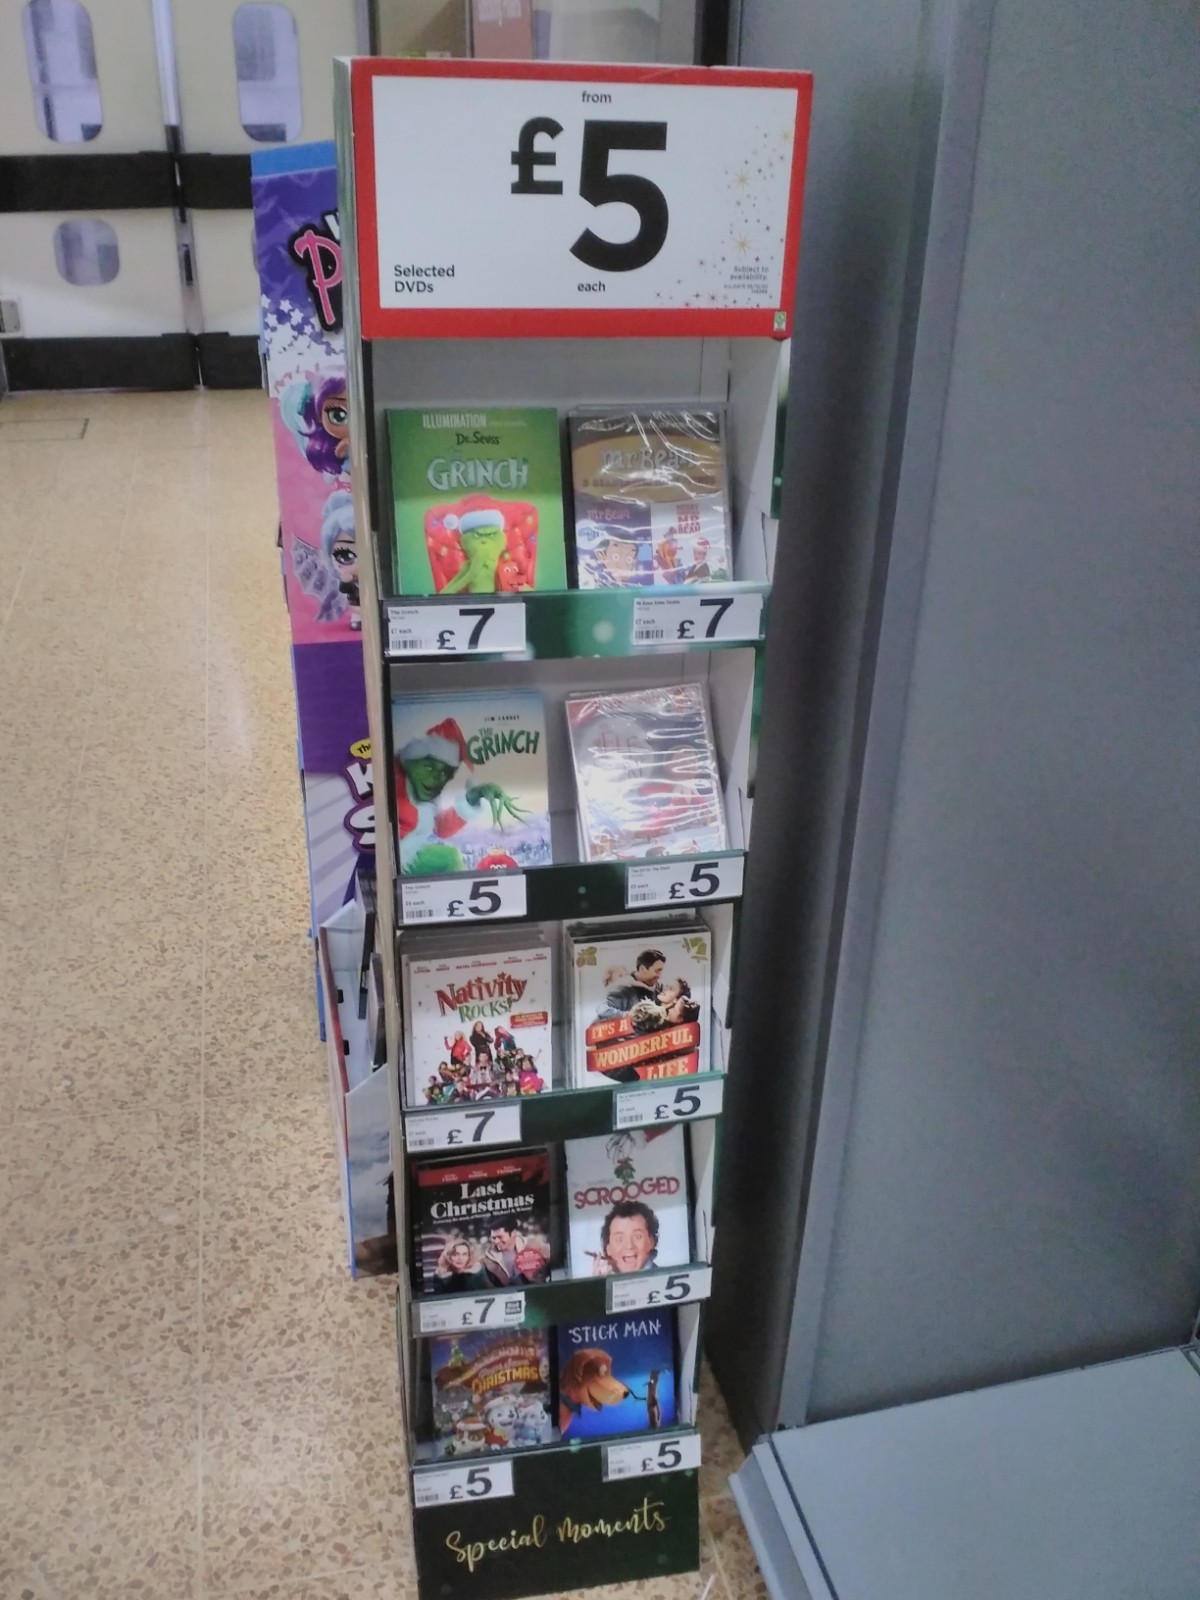 eXPD8 FieldMarketing on Twitter: "We're in #Asda stores this week setting up a #Gifting Tower on behalf of Universal Pictures 🌍 With DVDs that would make great #Christmas #gifts as #DowntonAbbey